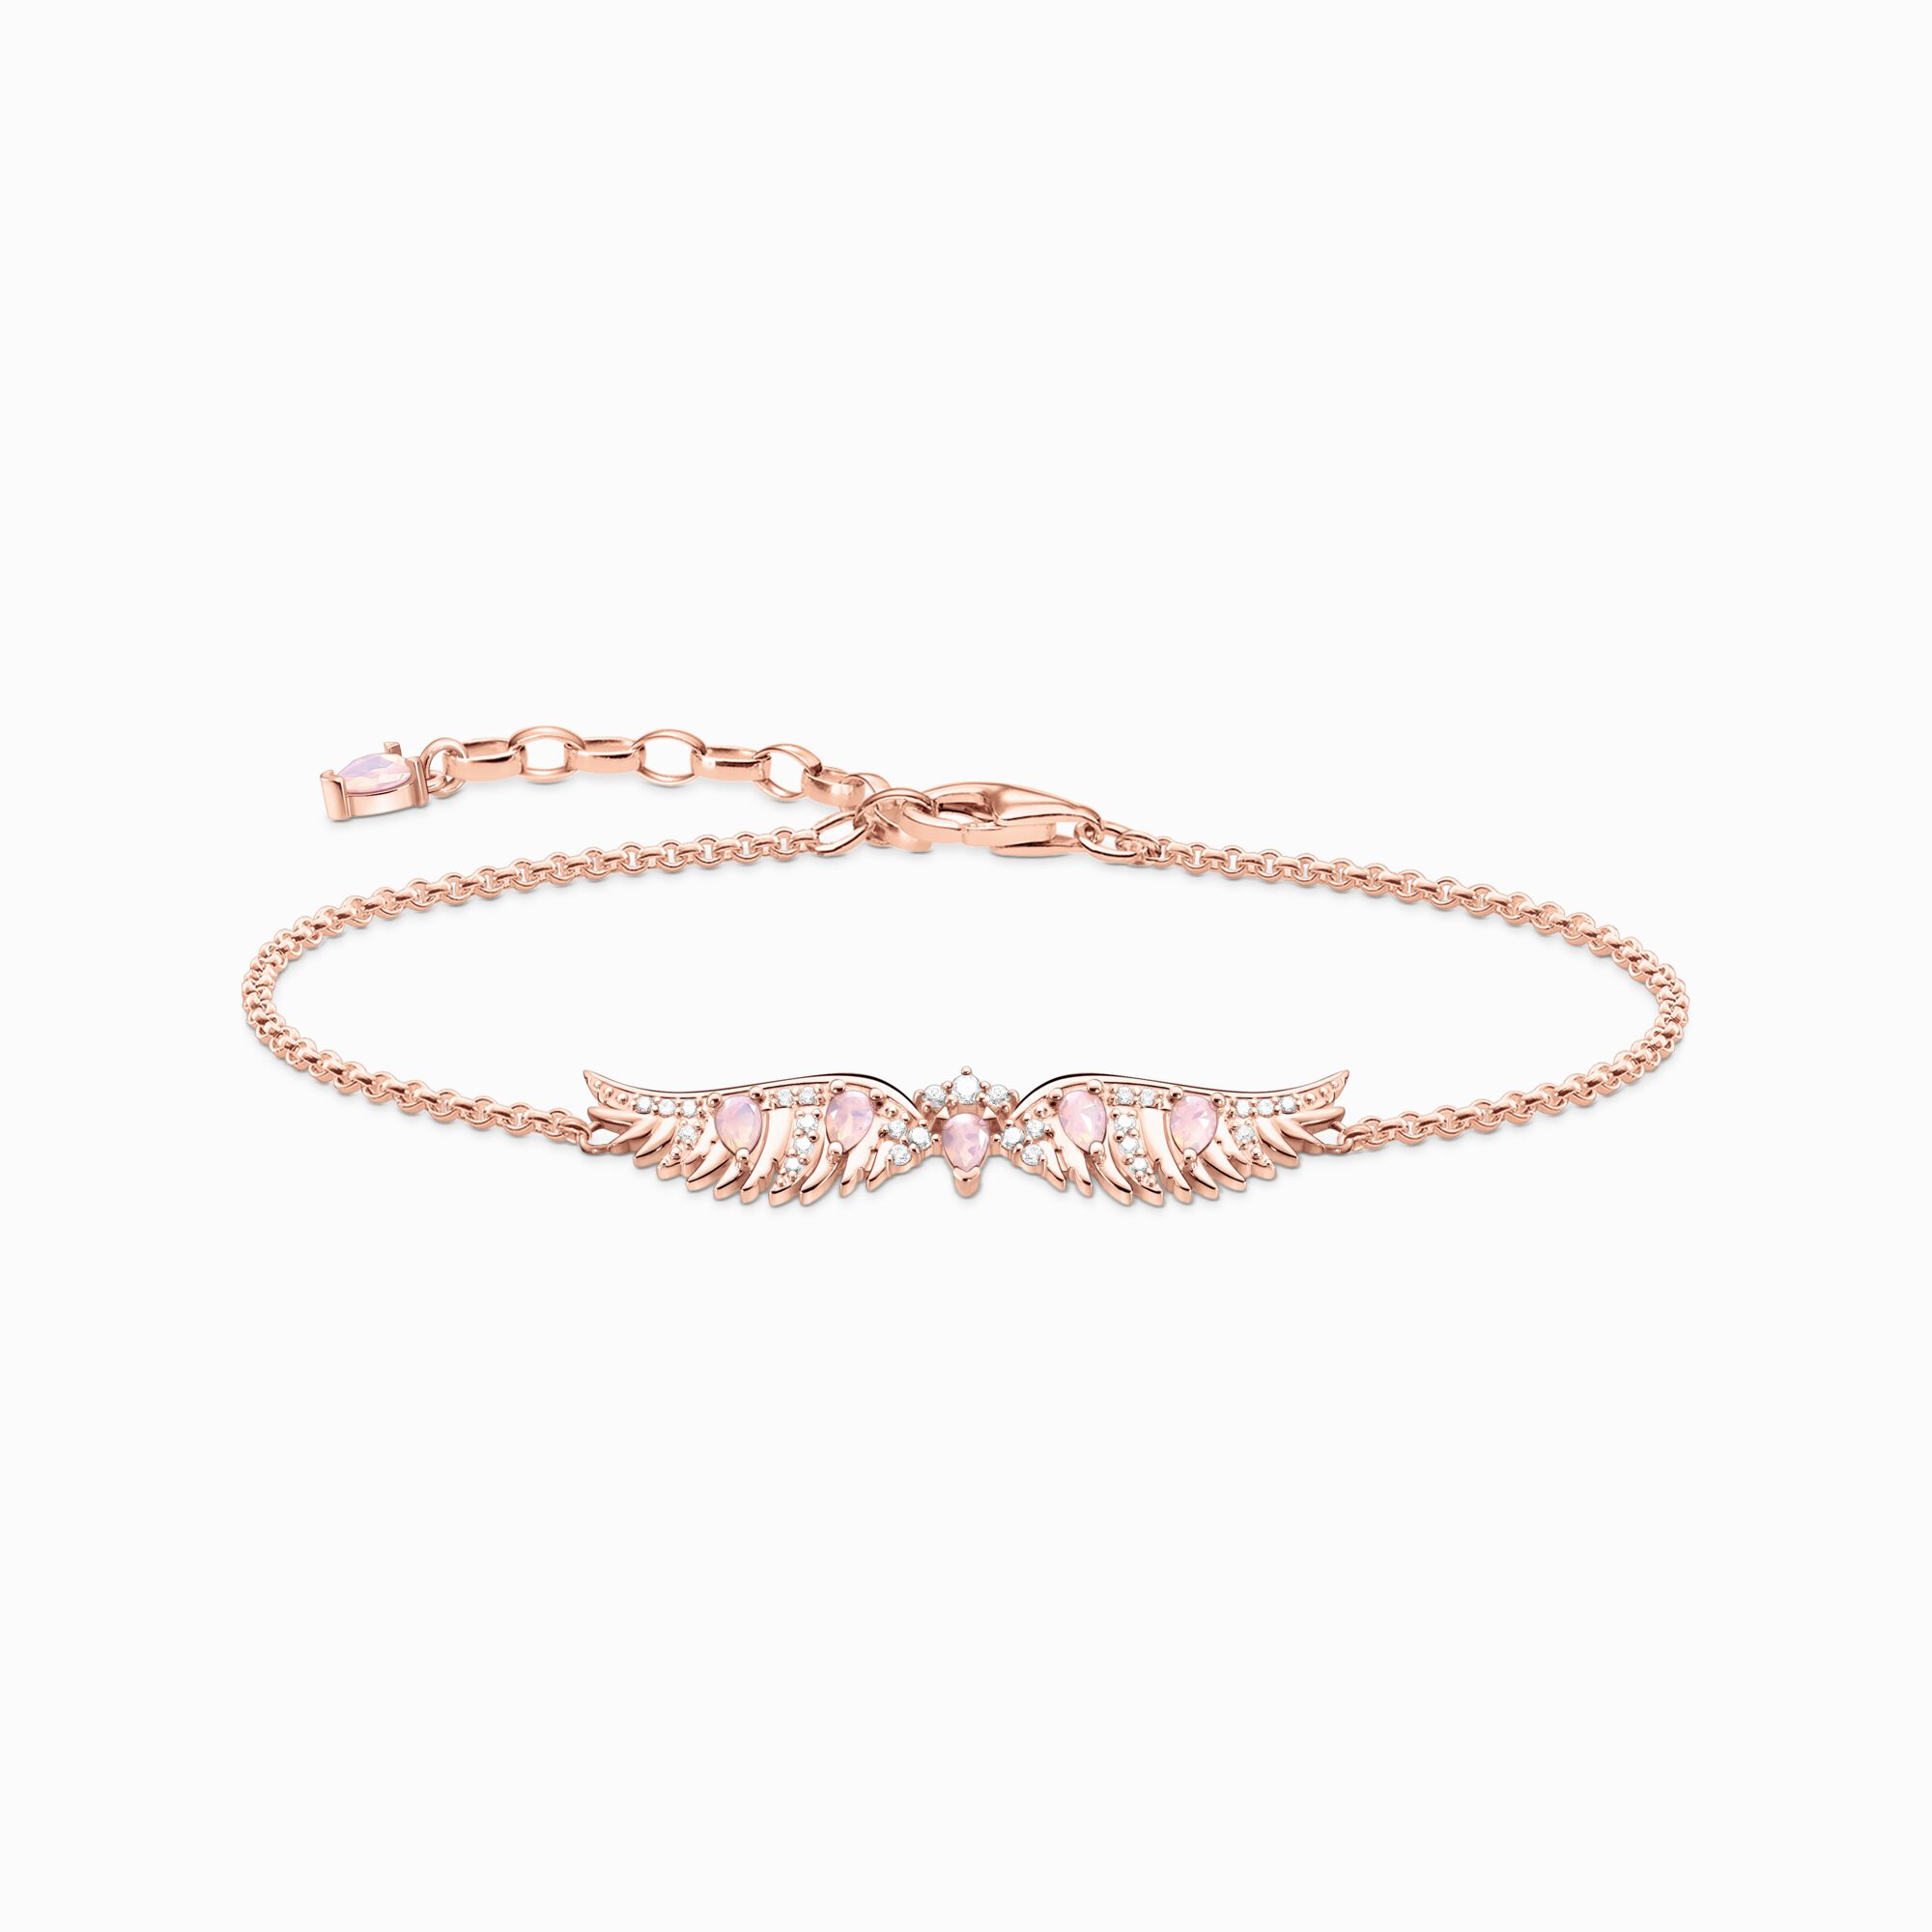 Bracelet phoenix wing with pink stones rose gold from the  collection in the THOMAS SABO online store